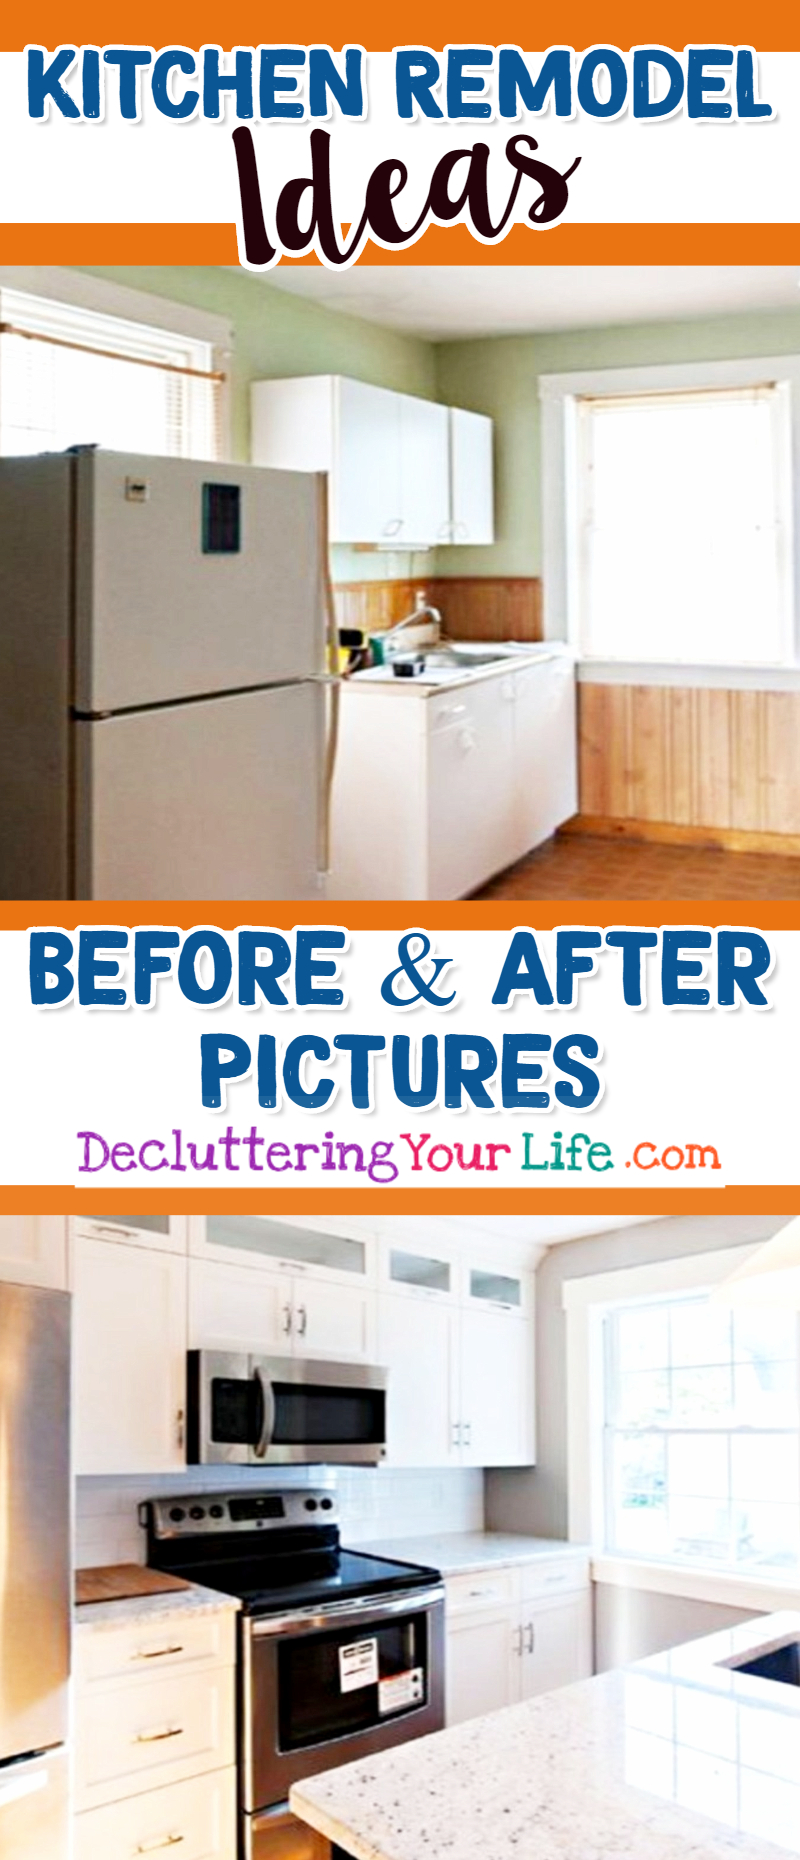 Kitchen Remodel Ideas-Before and After Pictures of Small Kitchens. LOTS of great makeover ideas for a small kitchen or apartment kitchen! #kitchenideas #beforeandafter #apartmentdecorating #diyhomedecor